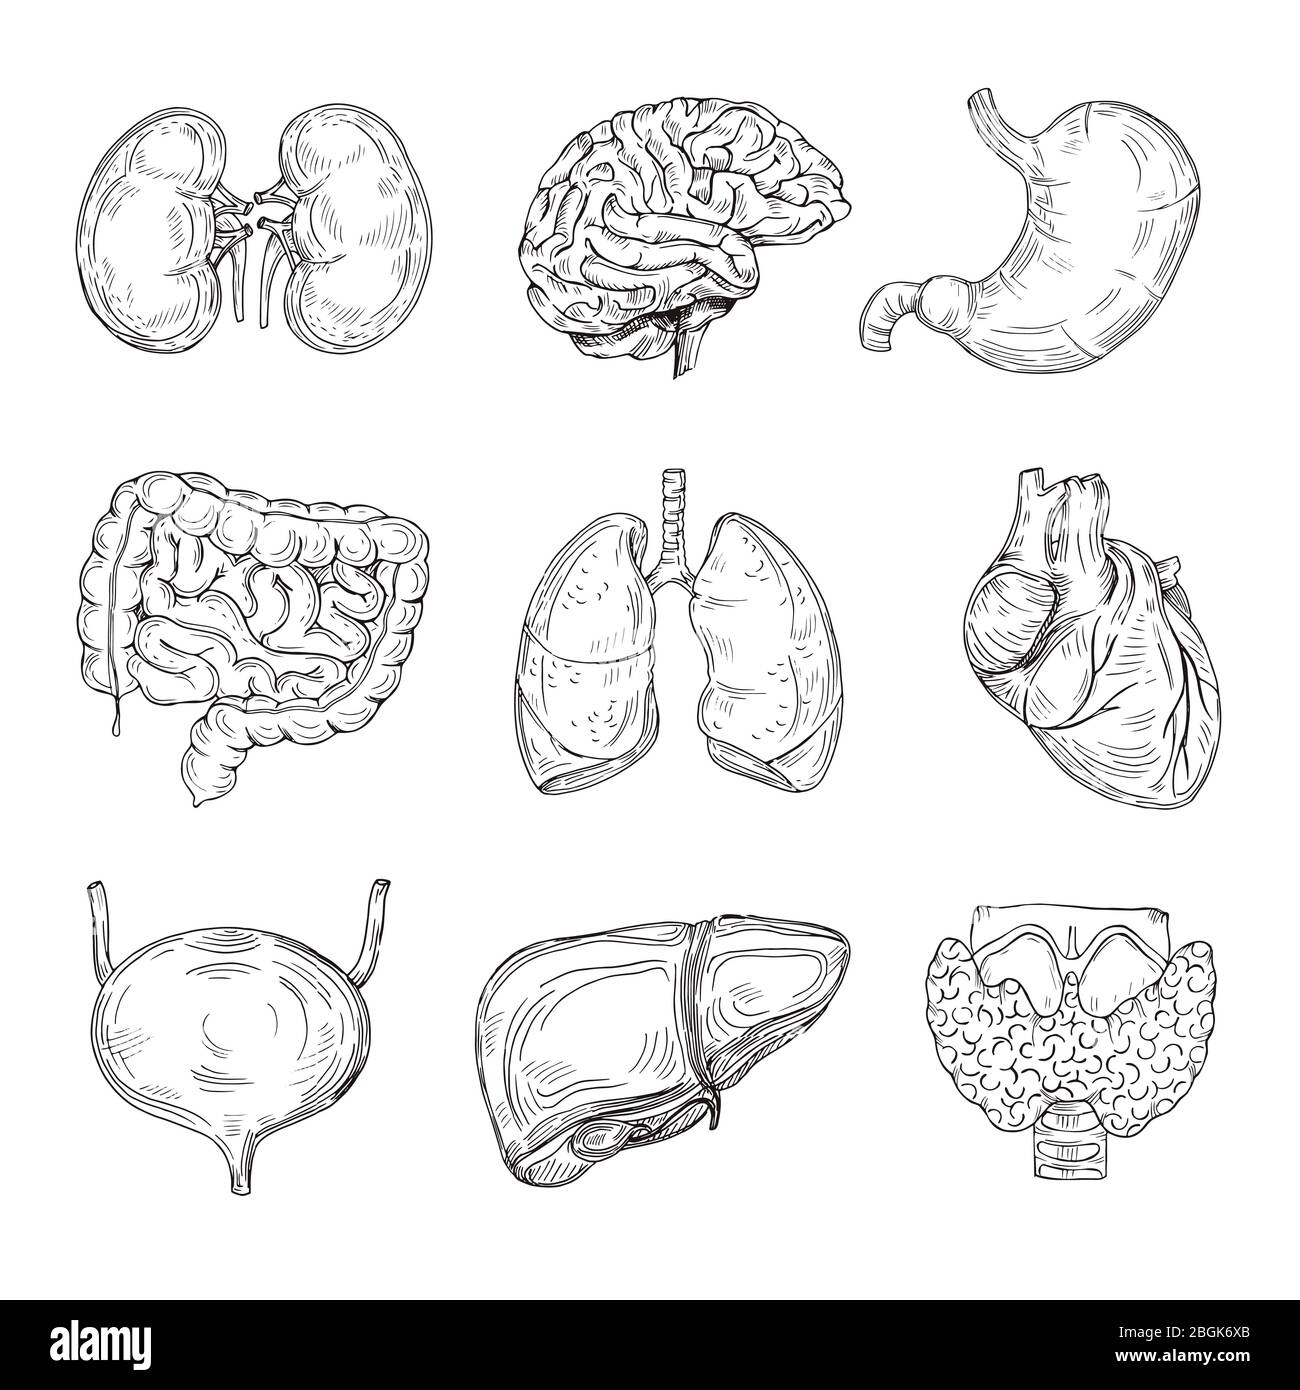 Human inner organs. Hand drawn brain, heart and kidneys, stomach and bladder. Sketch medical isolated vector illustration. Intestine organ of collection, internal digestive Stock Vector